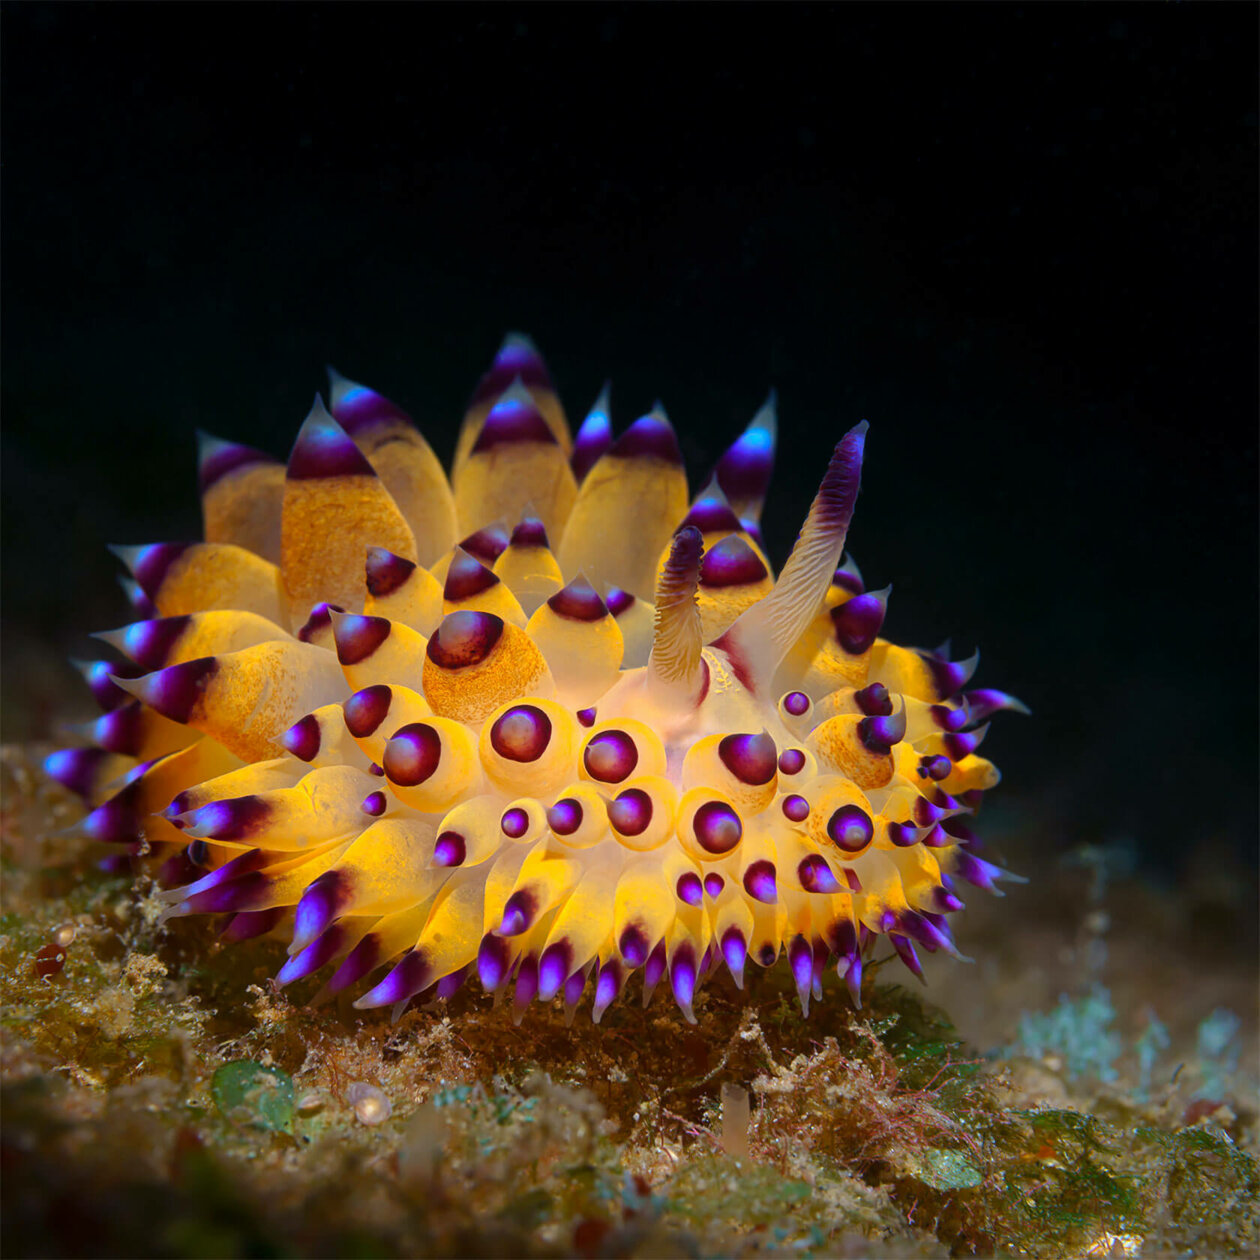 Nudibranchs Gorgeous Pictures Of Sea Slugs By Andrey Savin 5